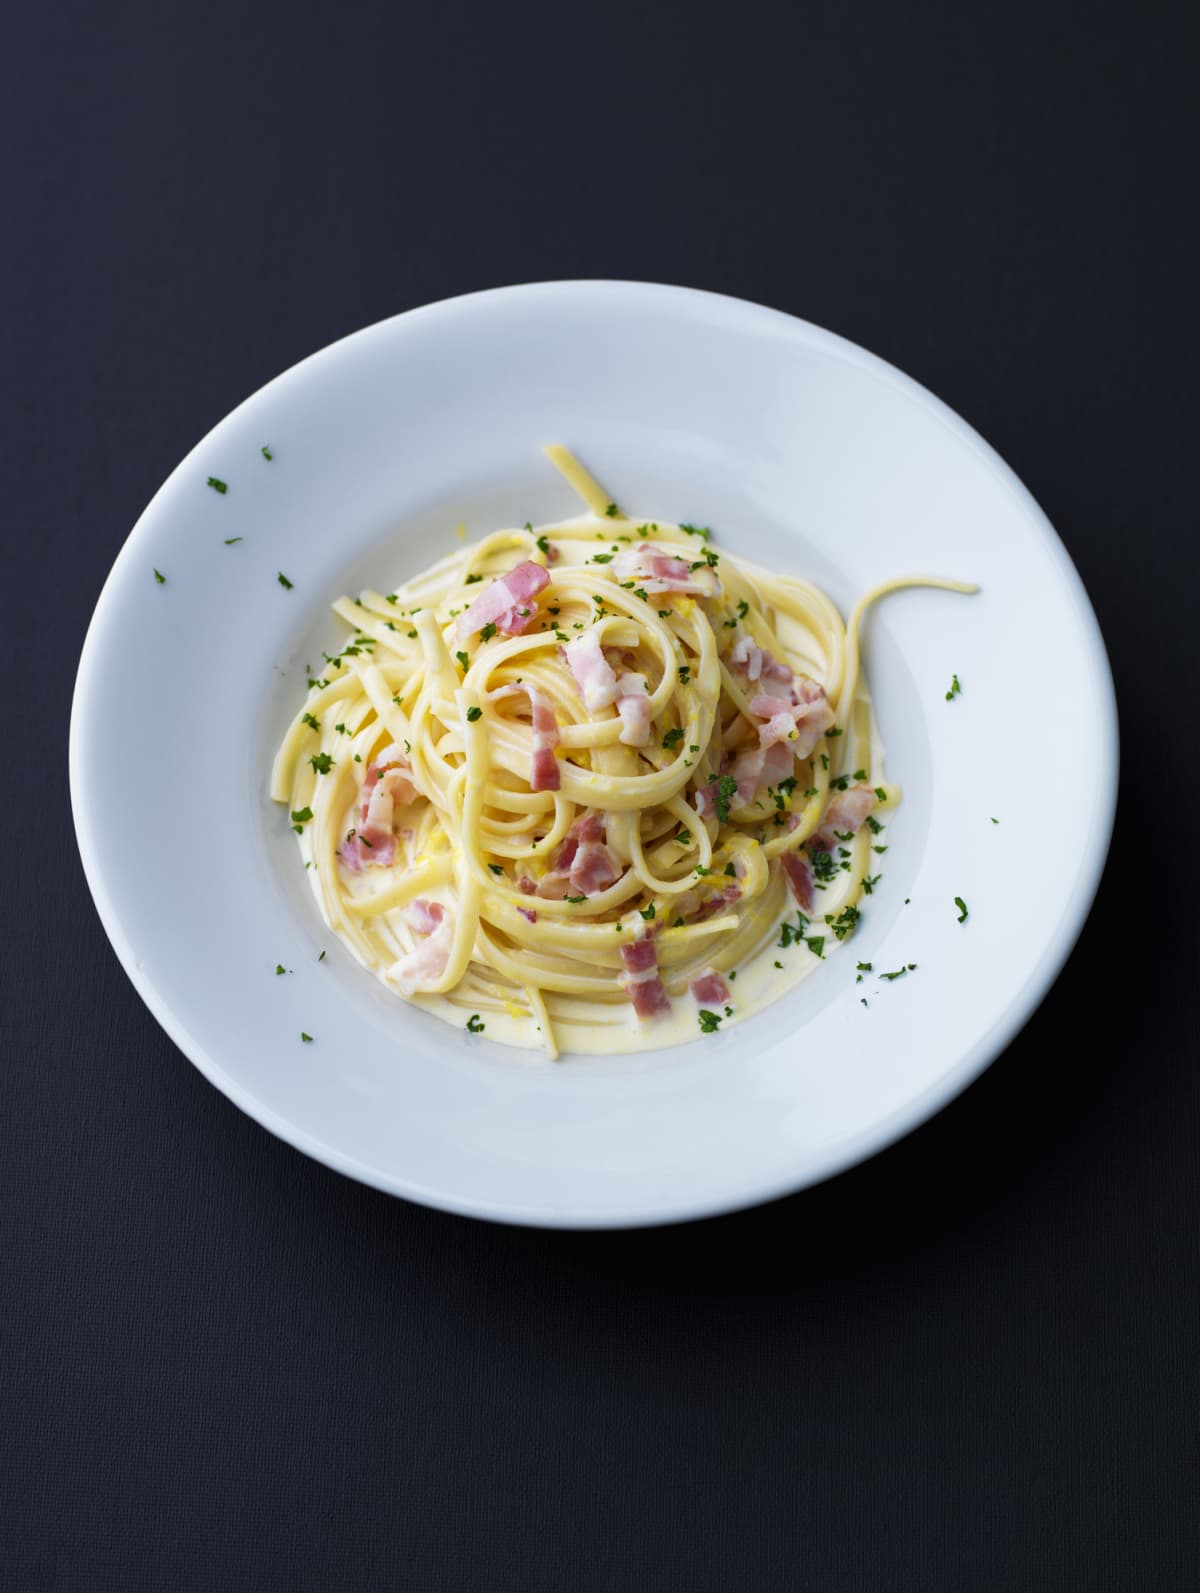 Plate of spaghetti carbonara on solid black background